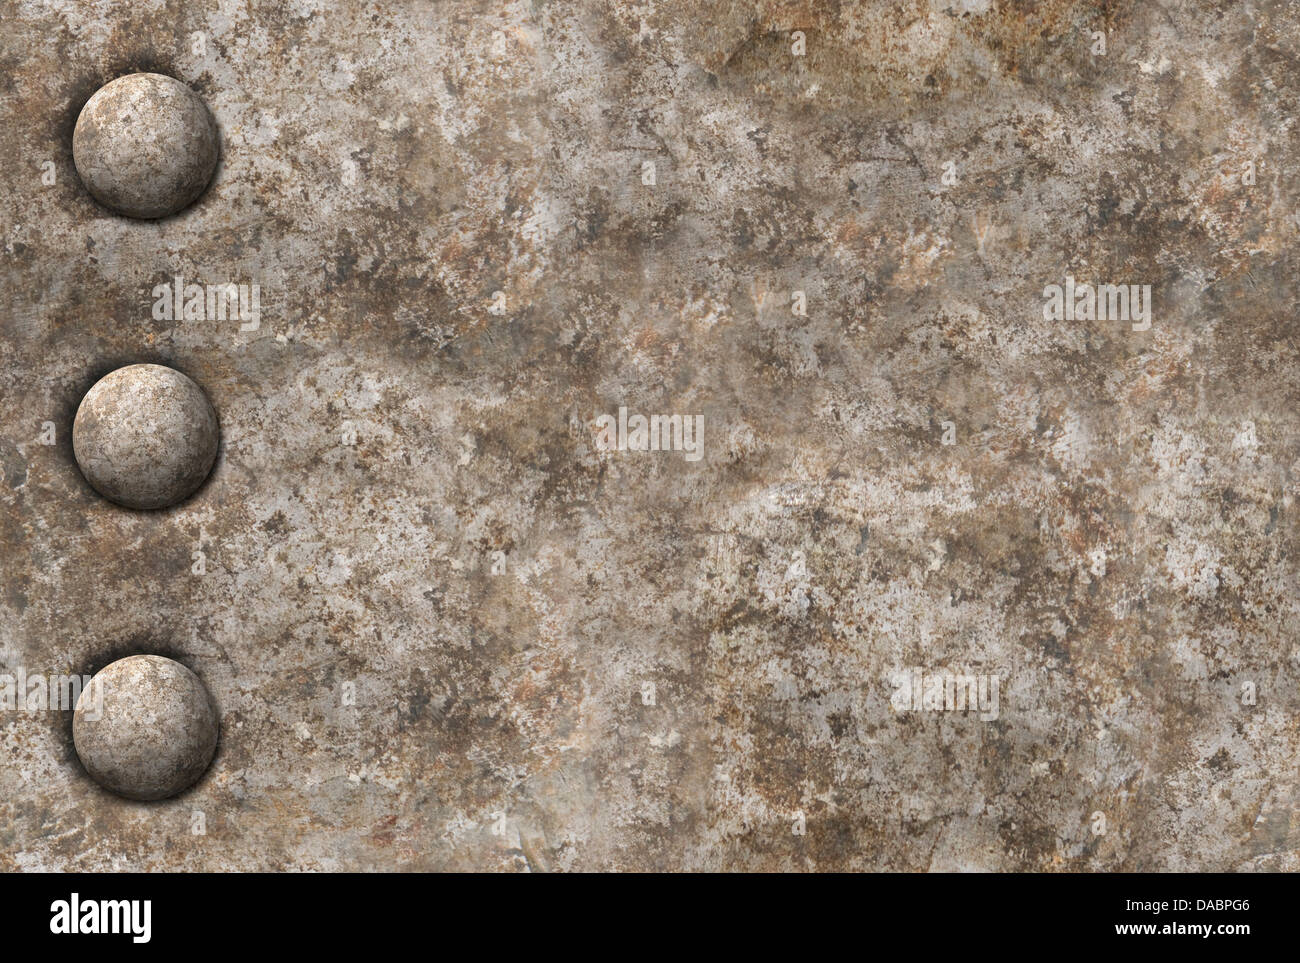 Distressed gray metal surface texture with a row of rivets. Image is seamlessly tileable. Stock Photo